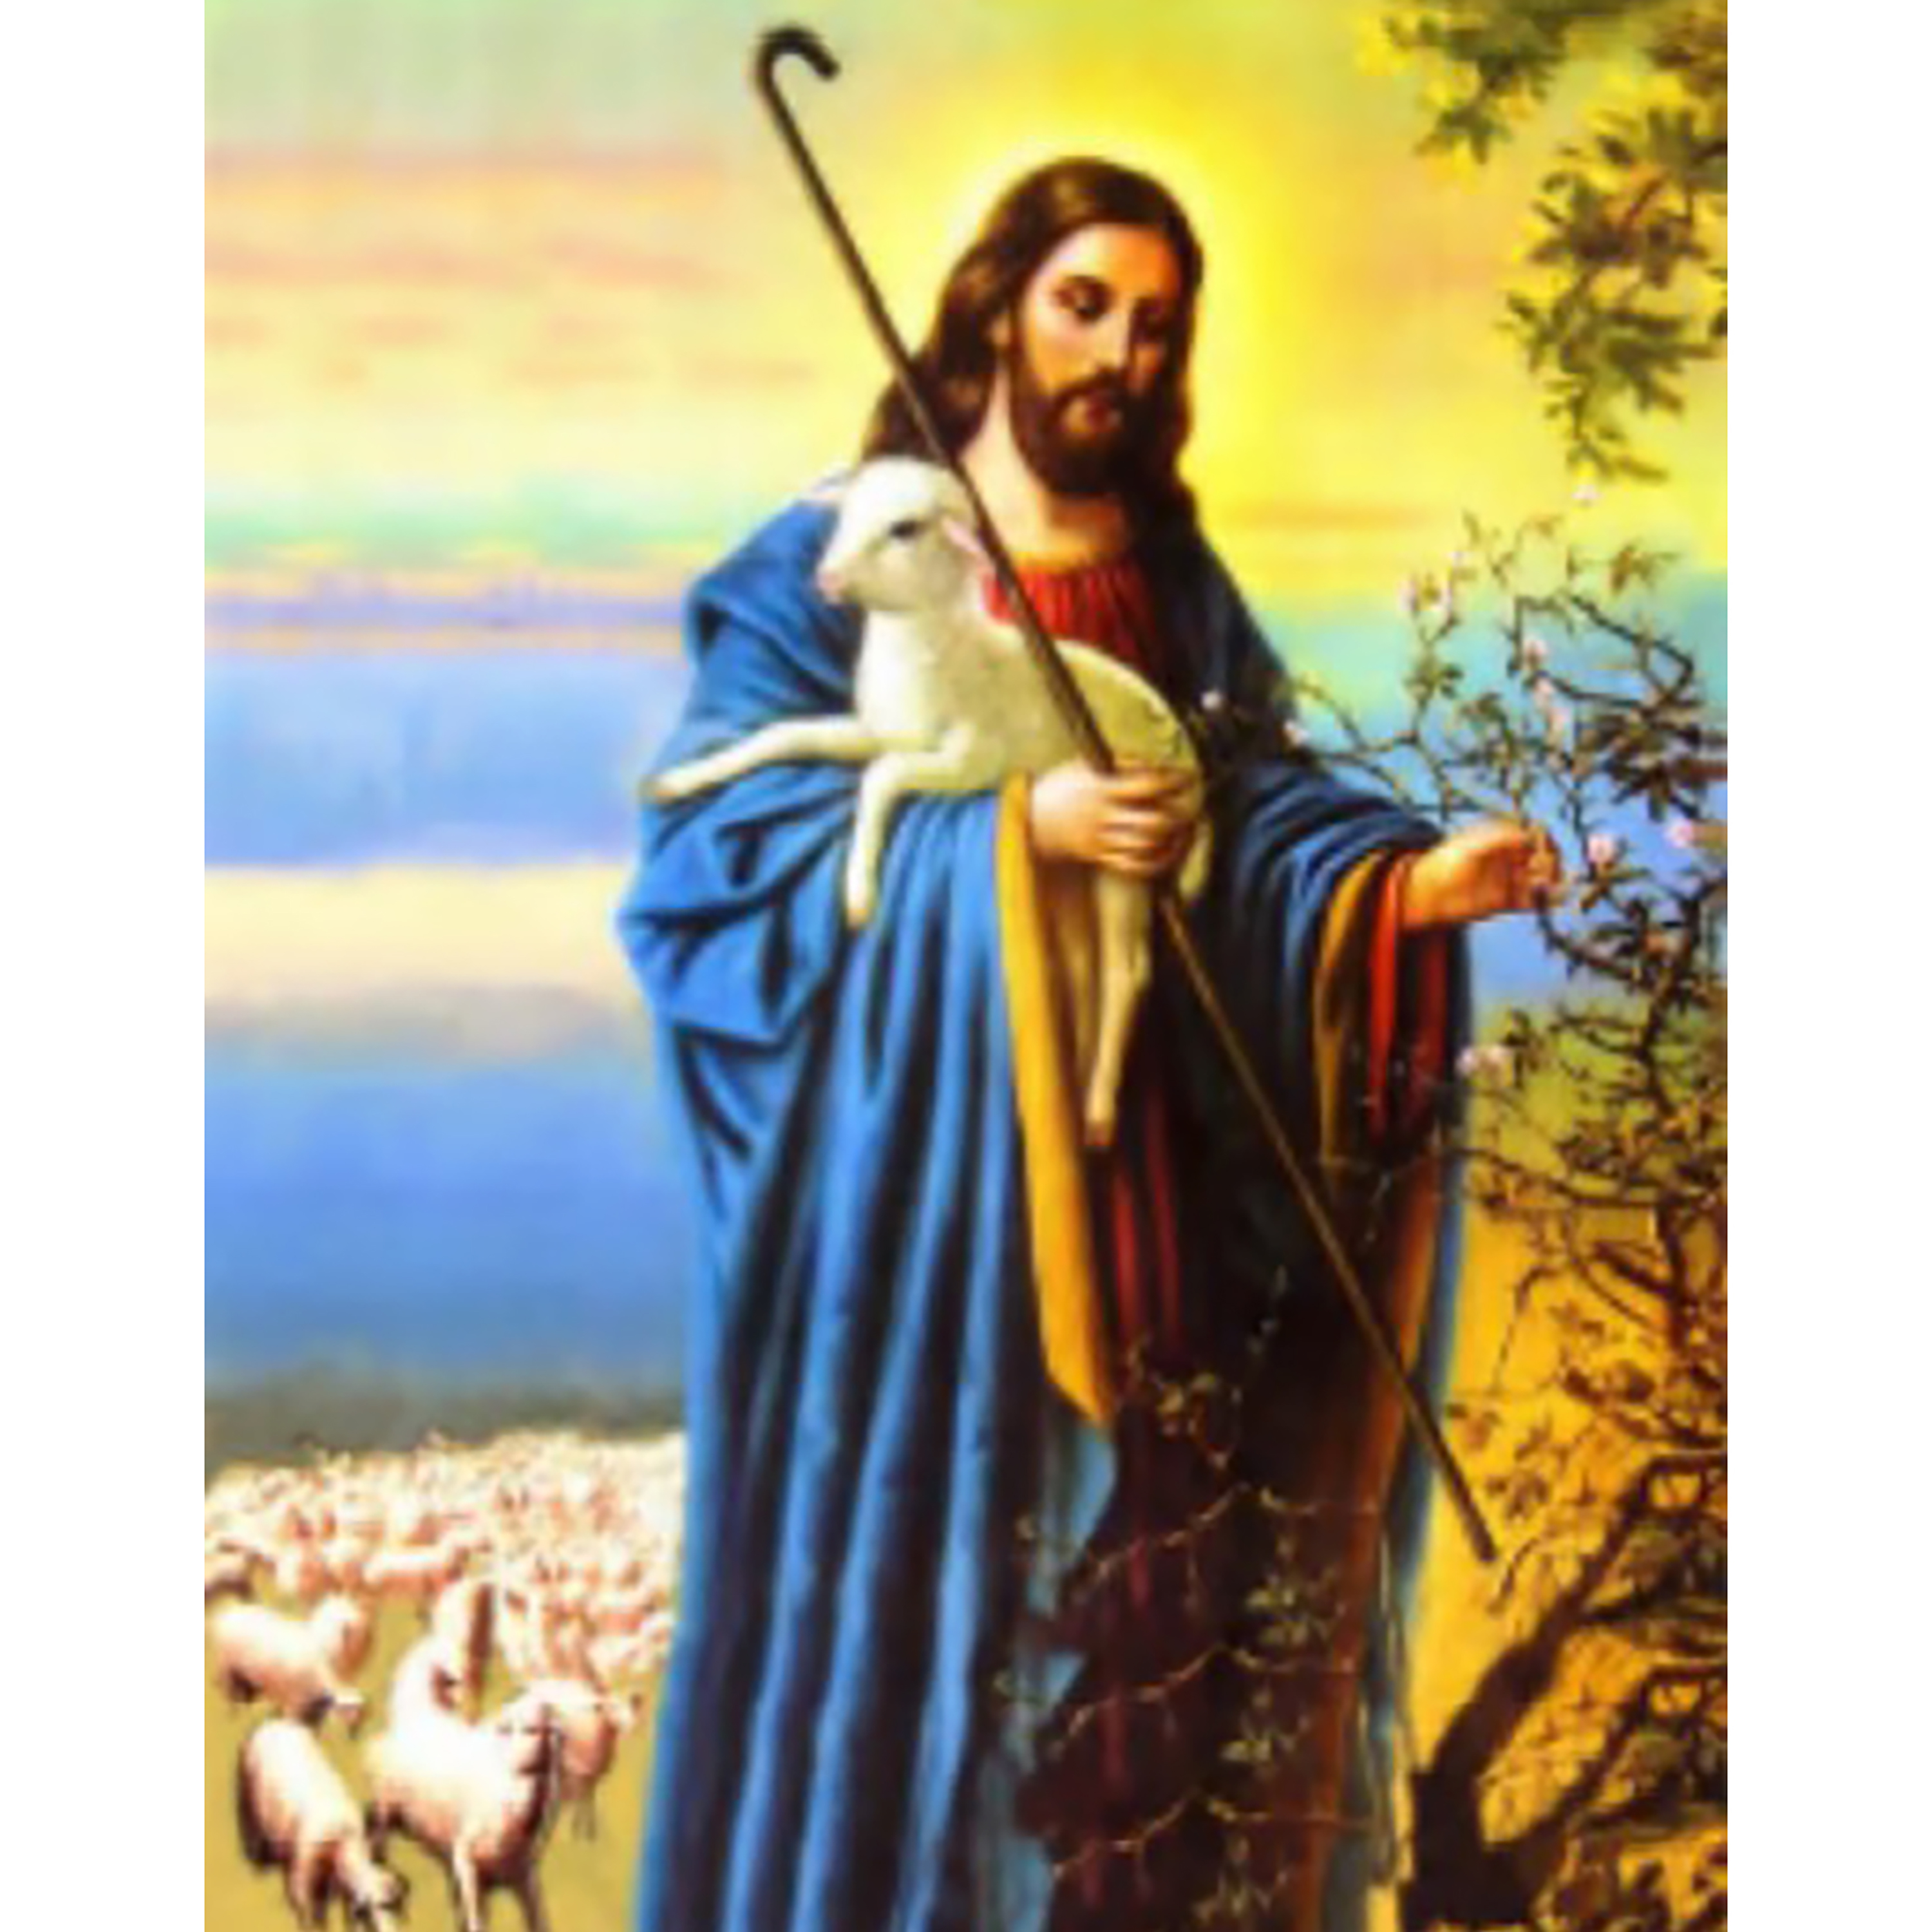 Sparkly Selections Jesus with the Lost Sheep Diamond Painting Kit